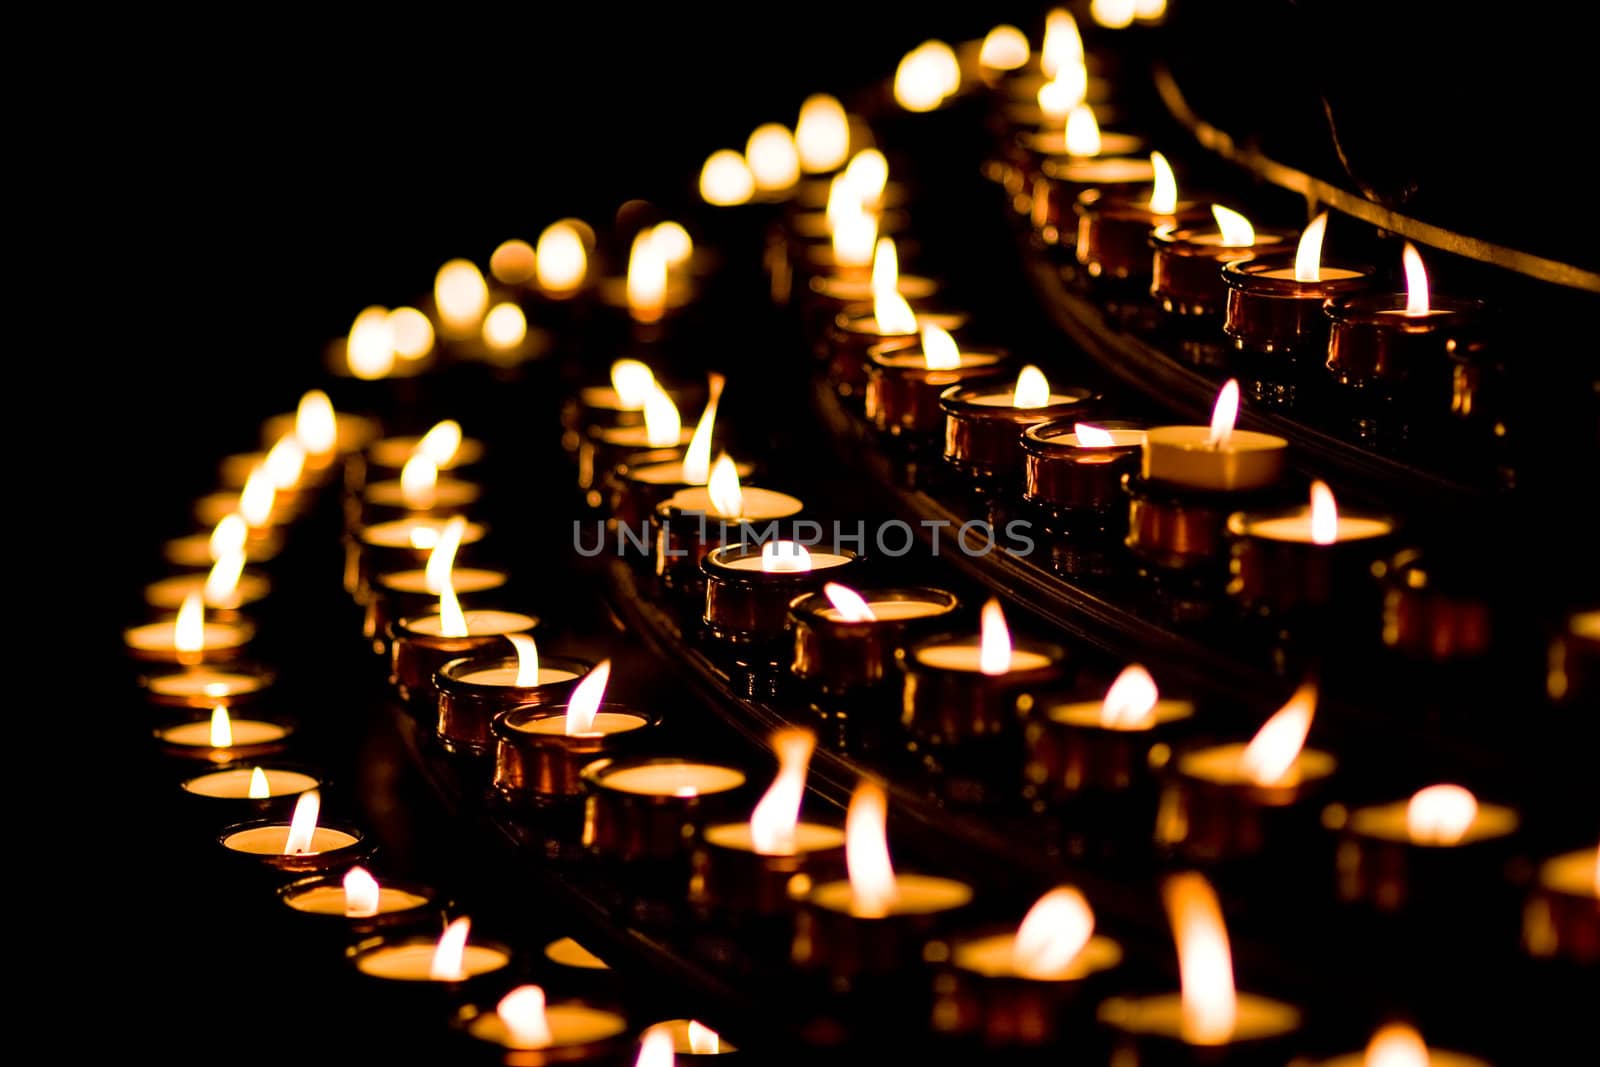 Candle light in a church